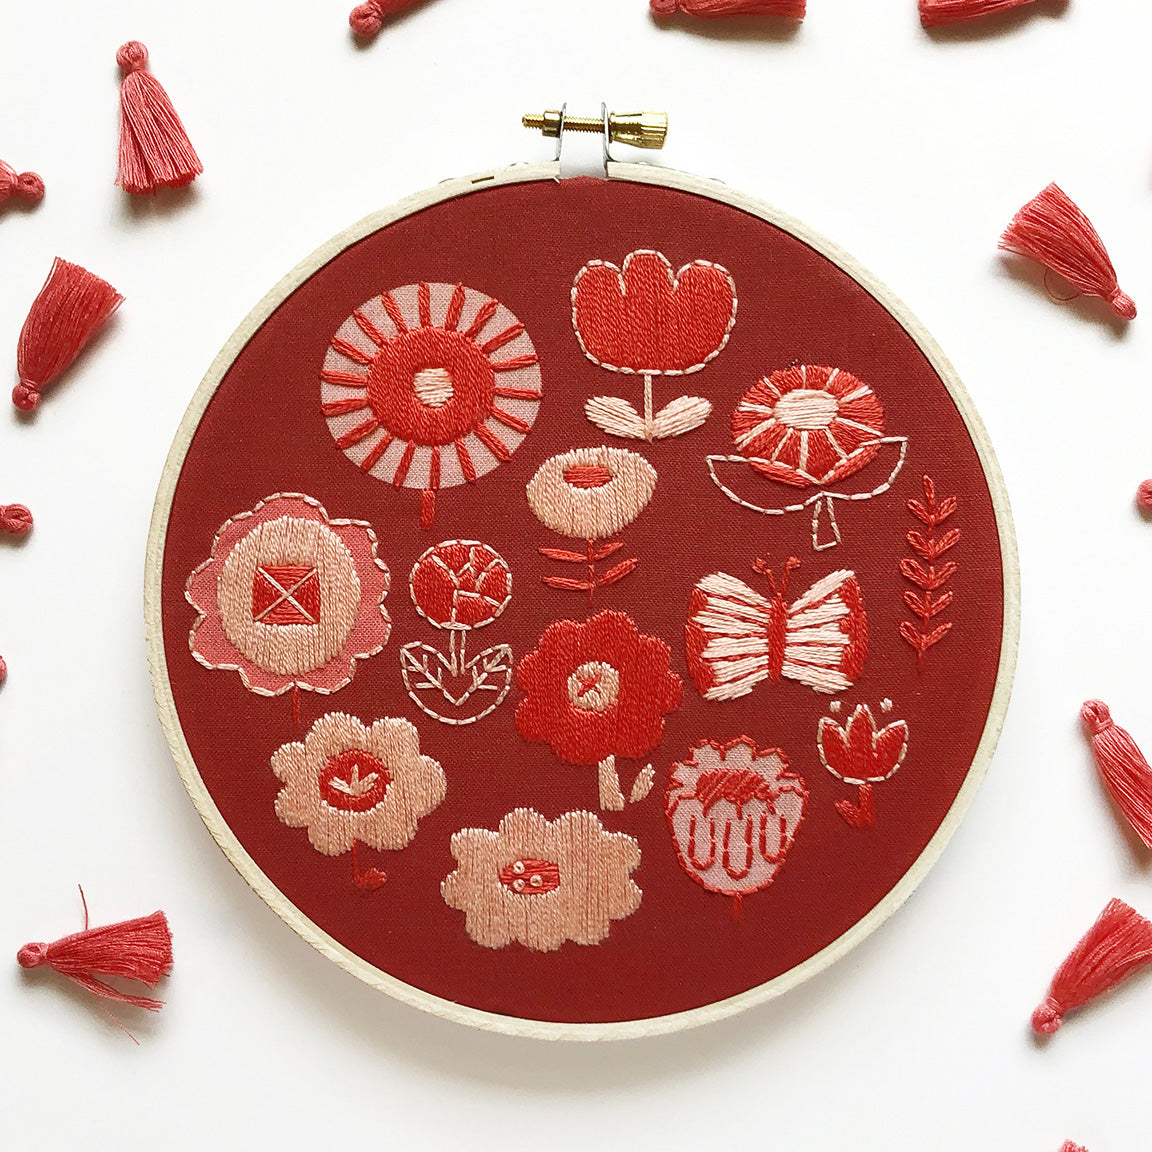 Flowers Hand Embroidery Kit - Stitched Modern